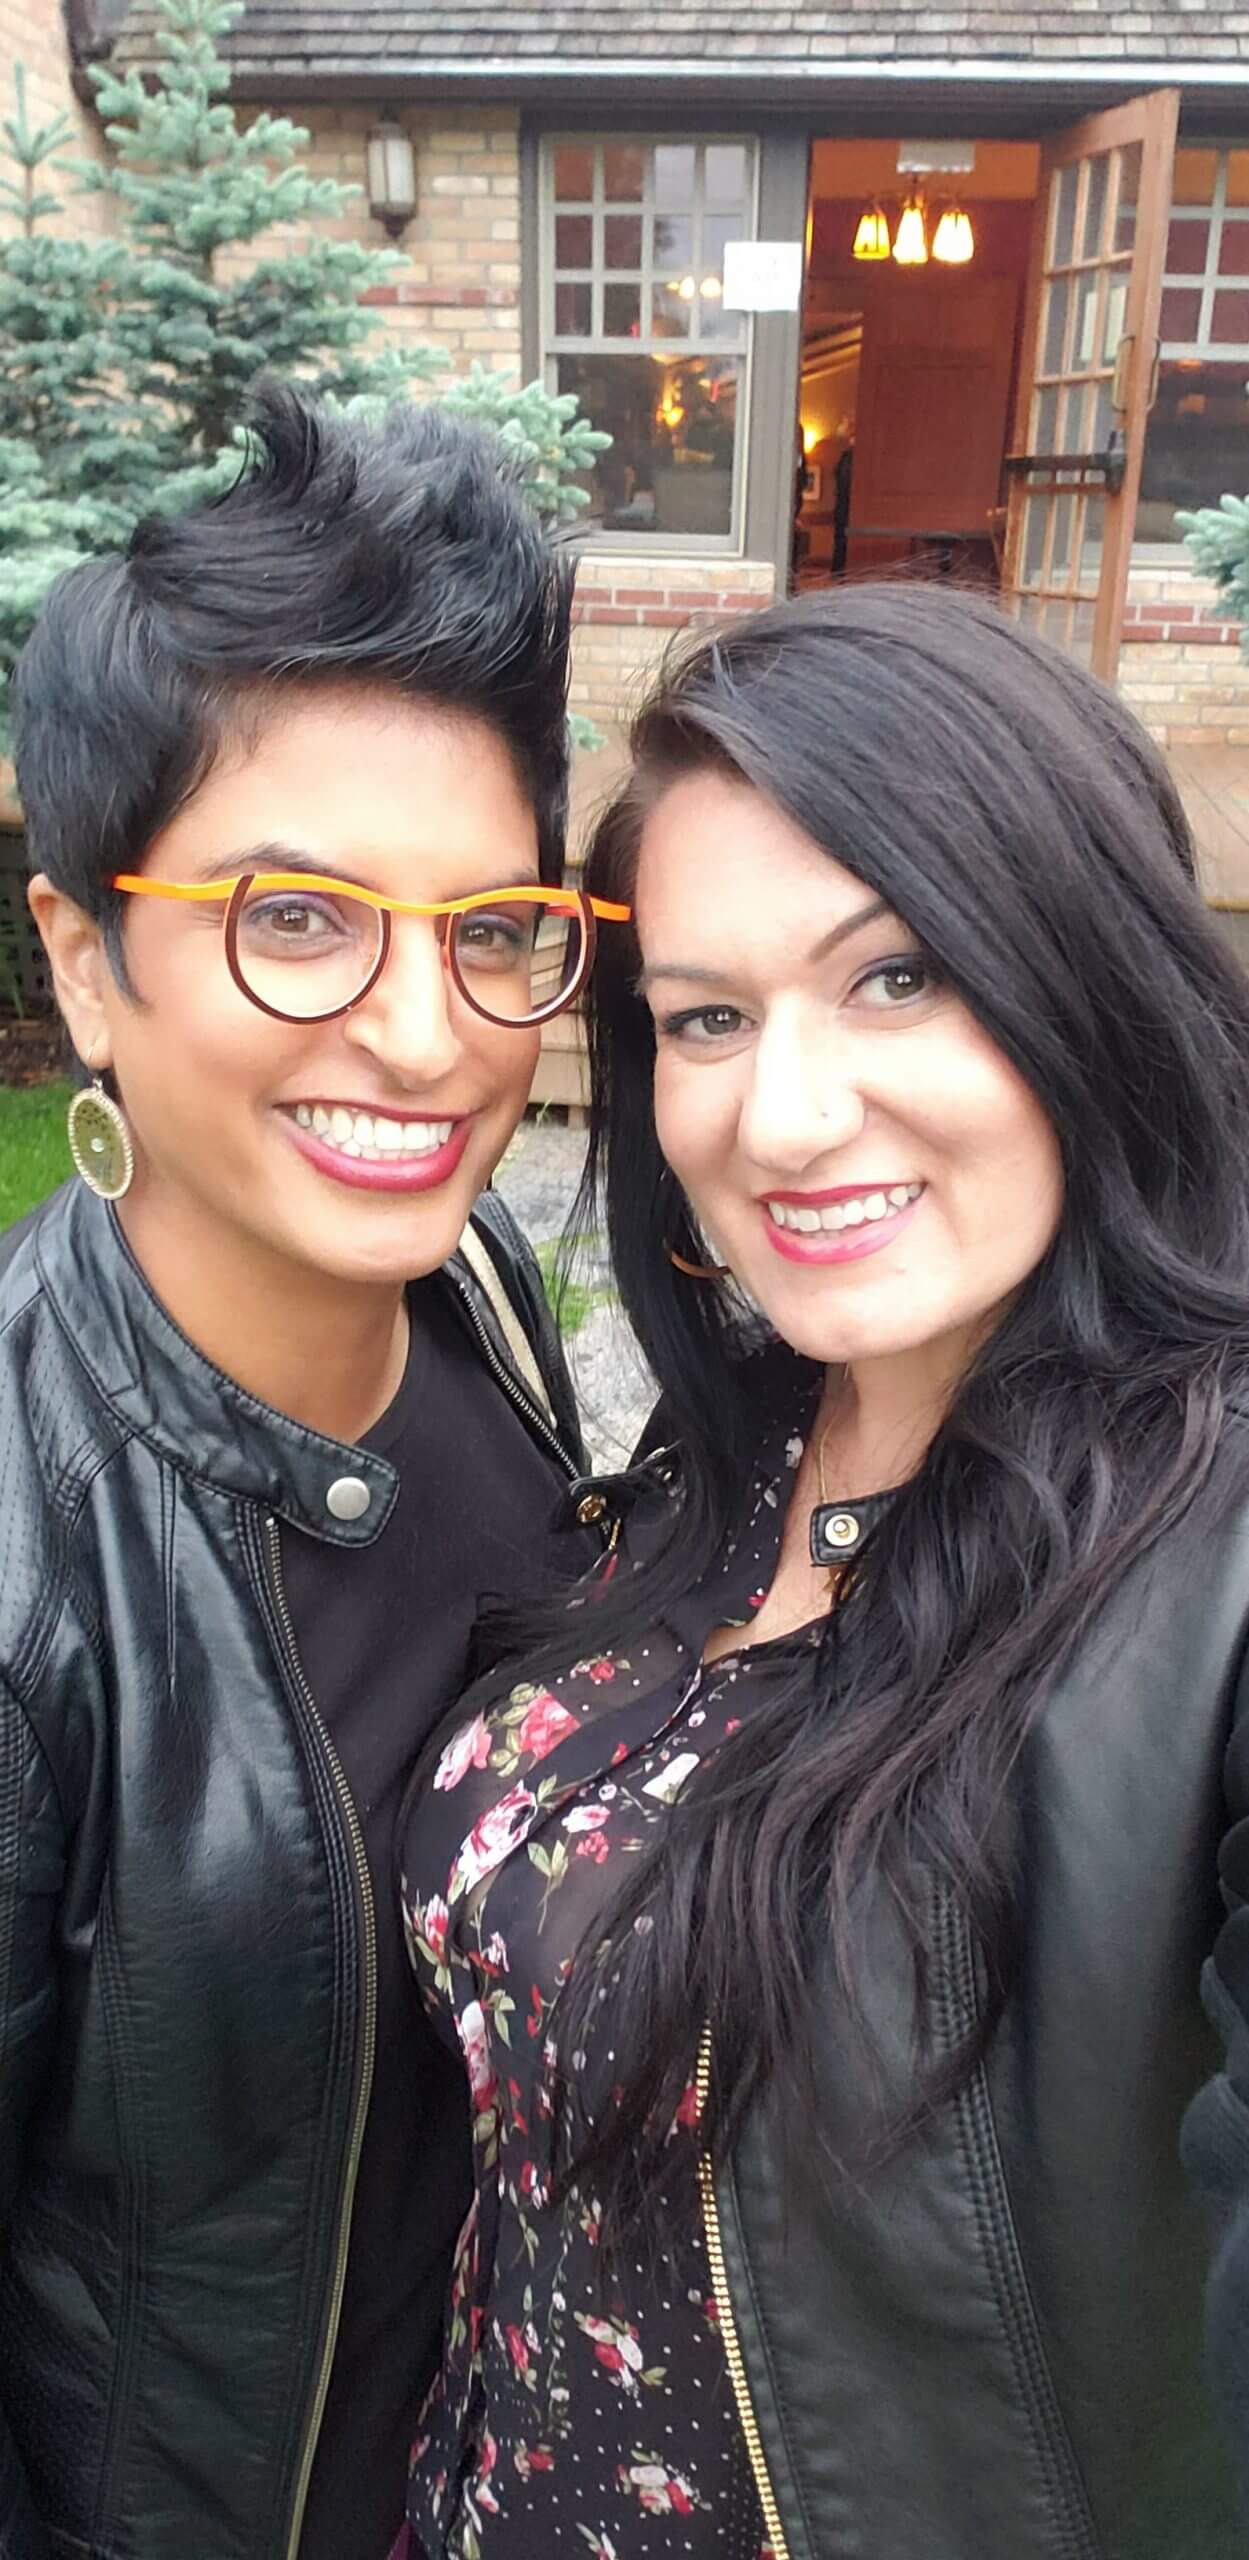 Love Reconnected Course Aims To Teach Us How To Overcome Our Differences When It Comes To LGBTQ2+ Acceptance: L-R: Hasina Juma & Carmella Wallace.